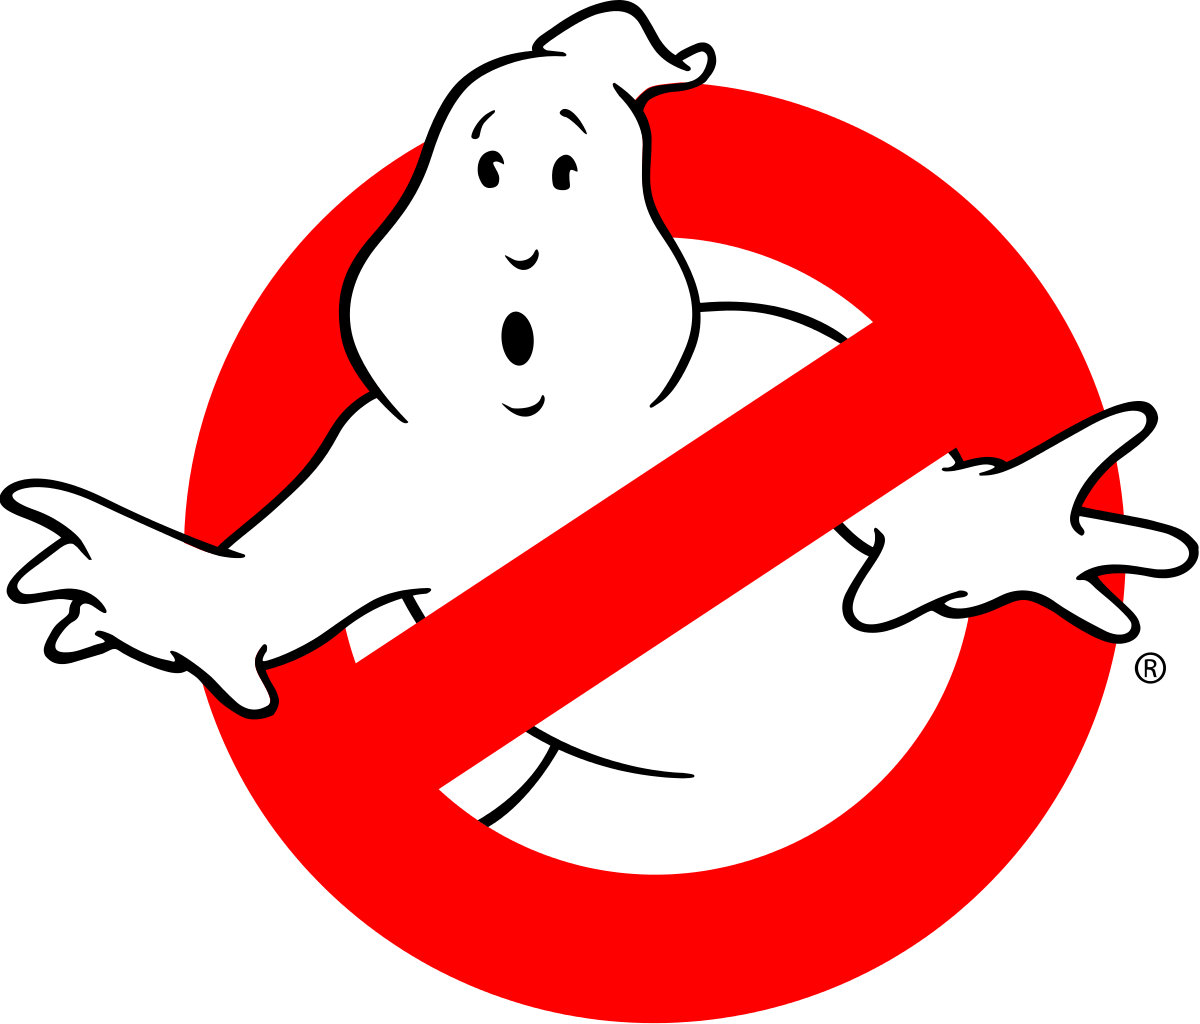 Ghostbusters Cinematic Universe on the way? 